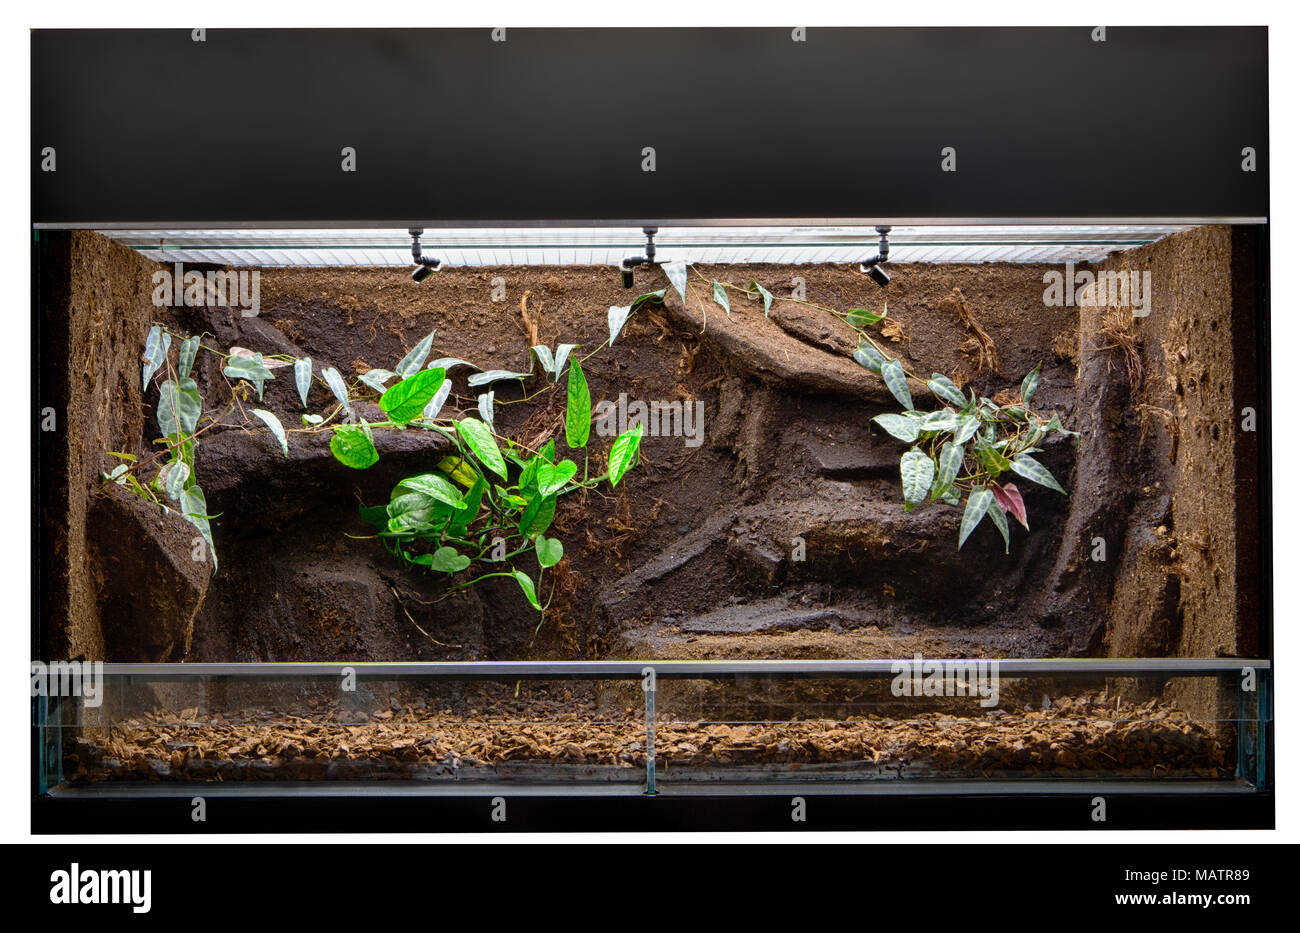 Terrarium to keep tropical jungle animals such as lizards and poison dart frogs. Glass tank with decoration for rain forest  pet animal. Stock Photo